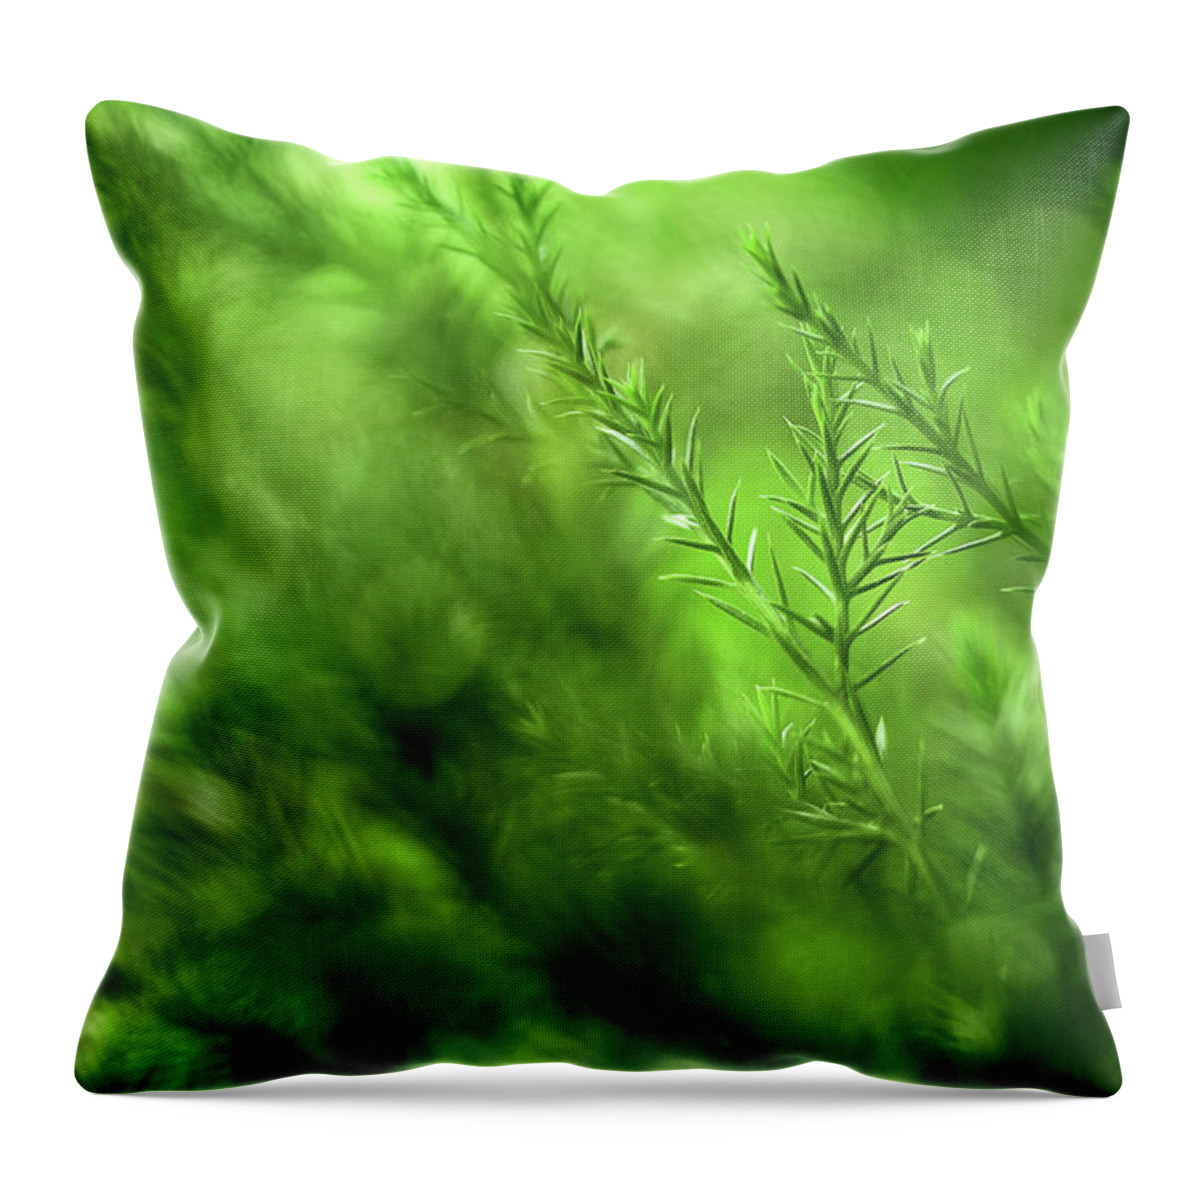 Pine Tree Throw Pillow featuring the photograph Finding My Way by Mike Eingle